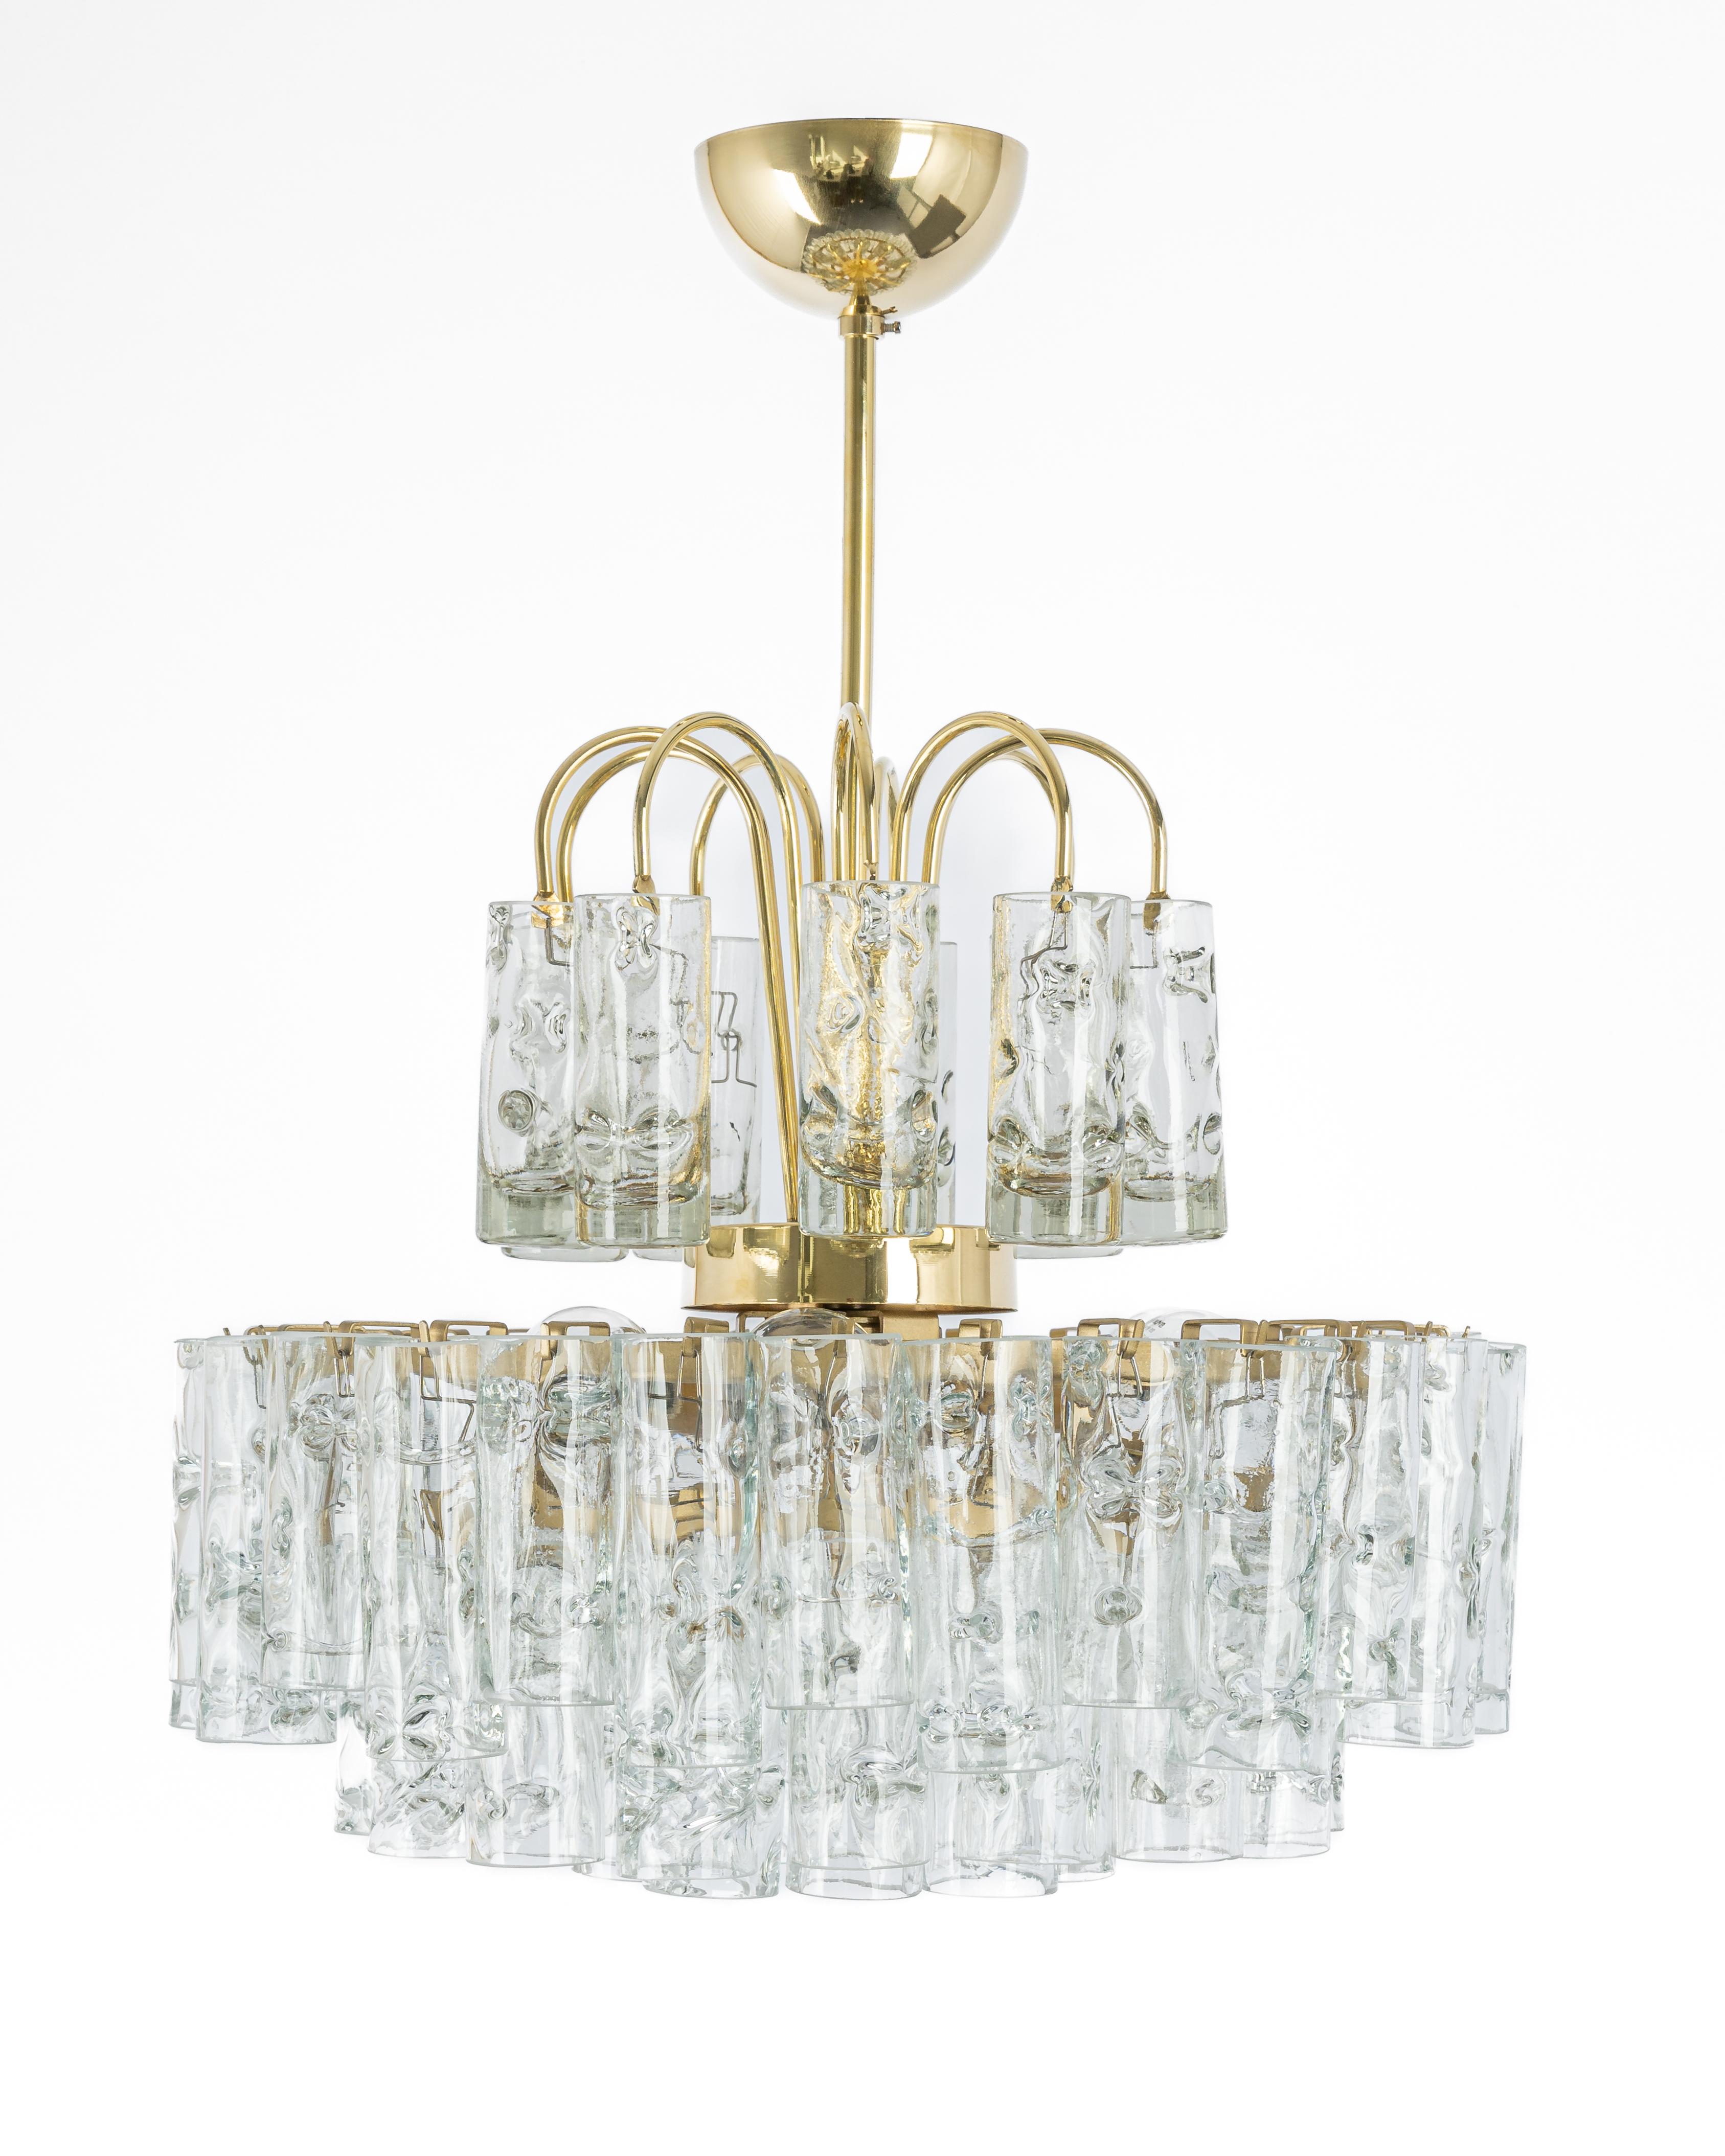 Fantastic four-tier midcentury chandelier by Doria, Germany manufactured, circa 1960-1969. Murano glass cylinders suspended from the fixture.

High quality and in very good condition. Cleaned, well-wired and ready to use. 

The fixture requires